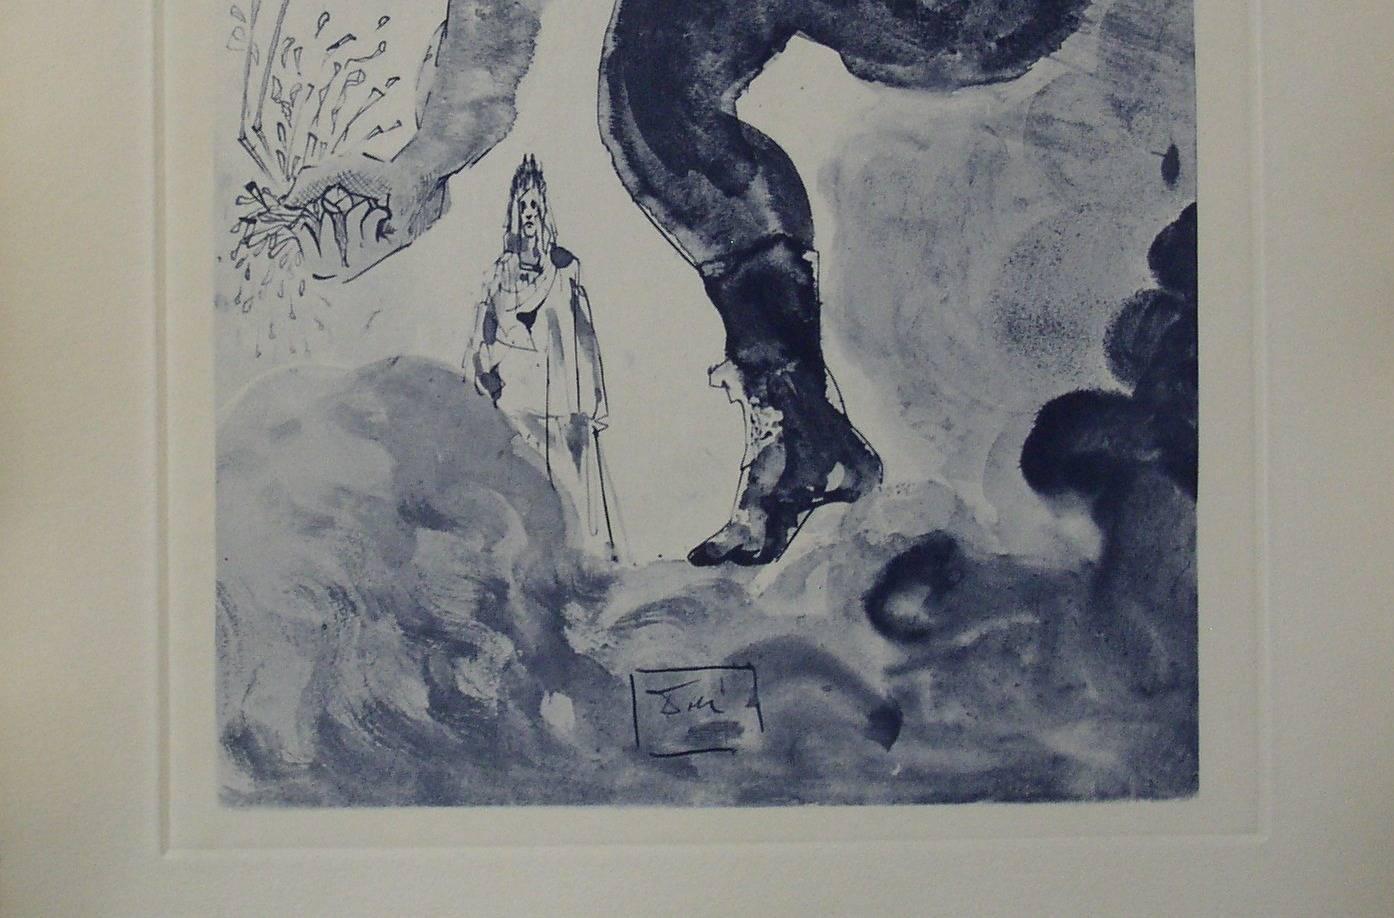 The Giants - Original etching - 150ex - Print by Salvador Dalí